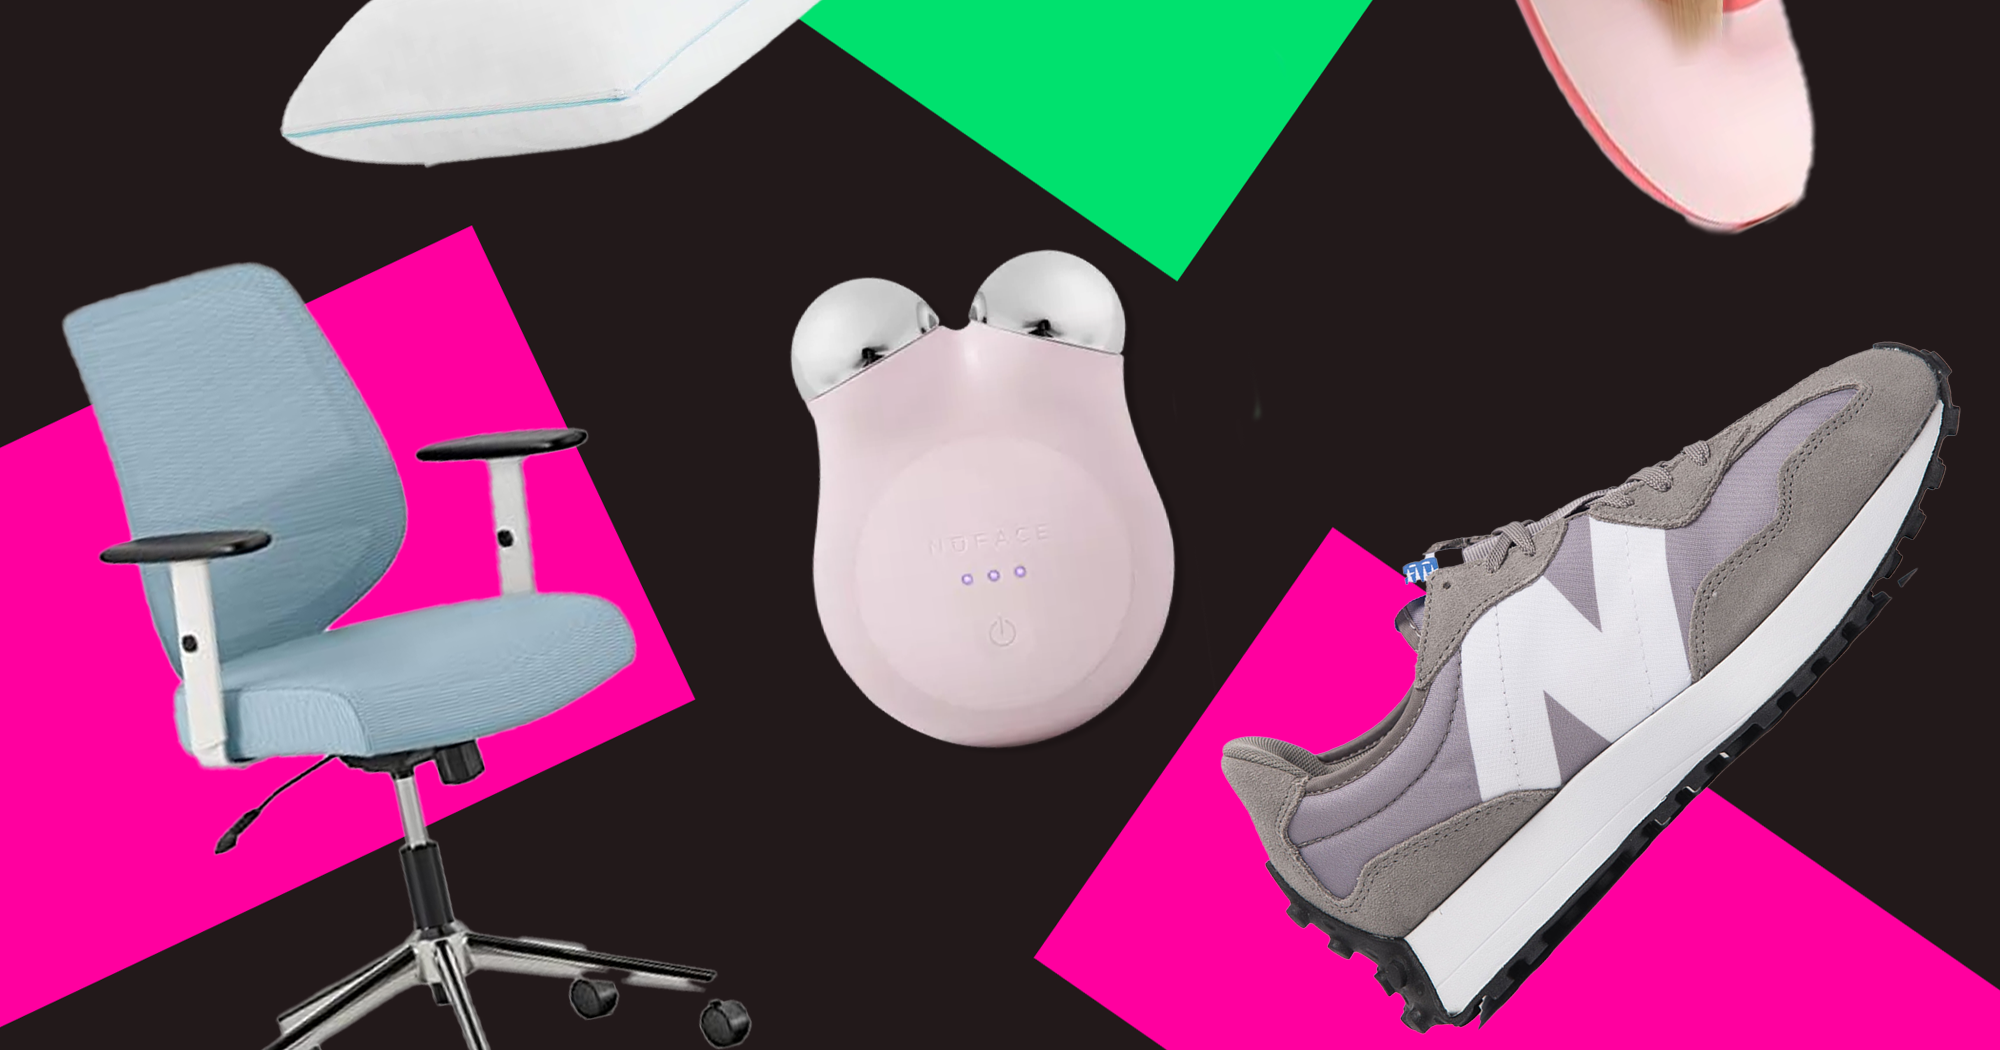 The 29 Cyber Monday Deals You Can’t Miss, According To Refinery29 Readers thumbnail